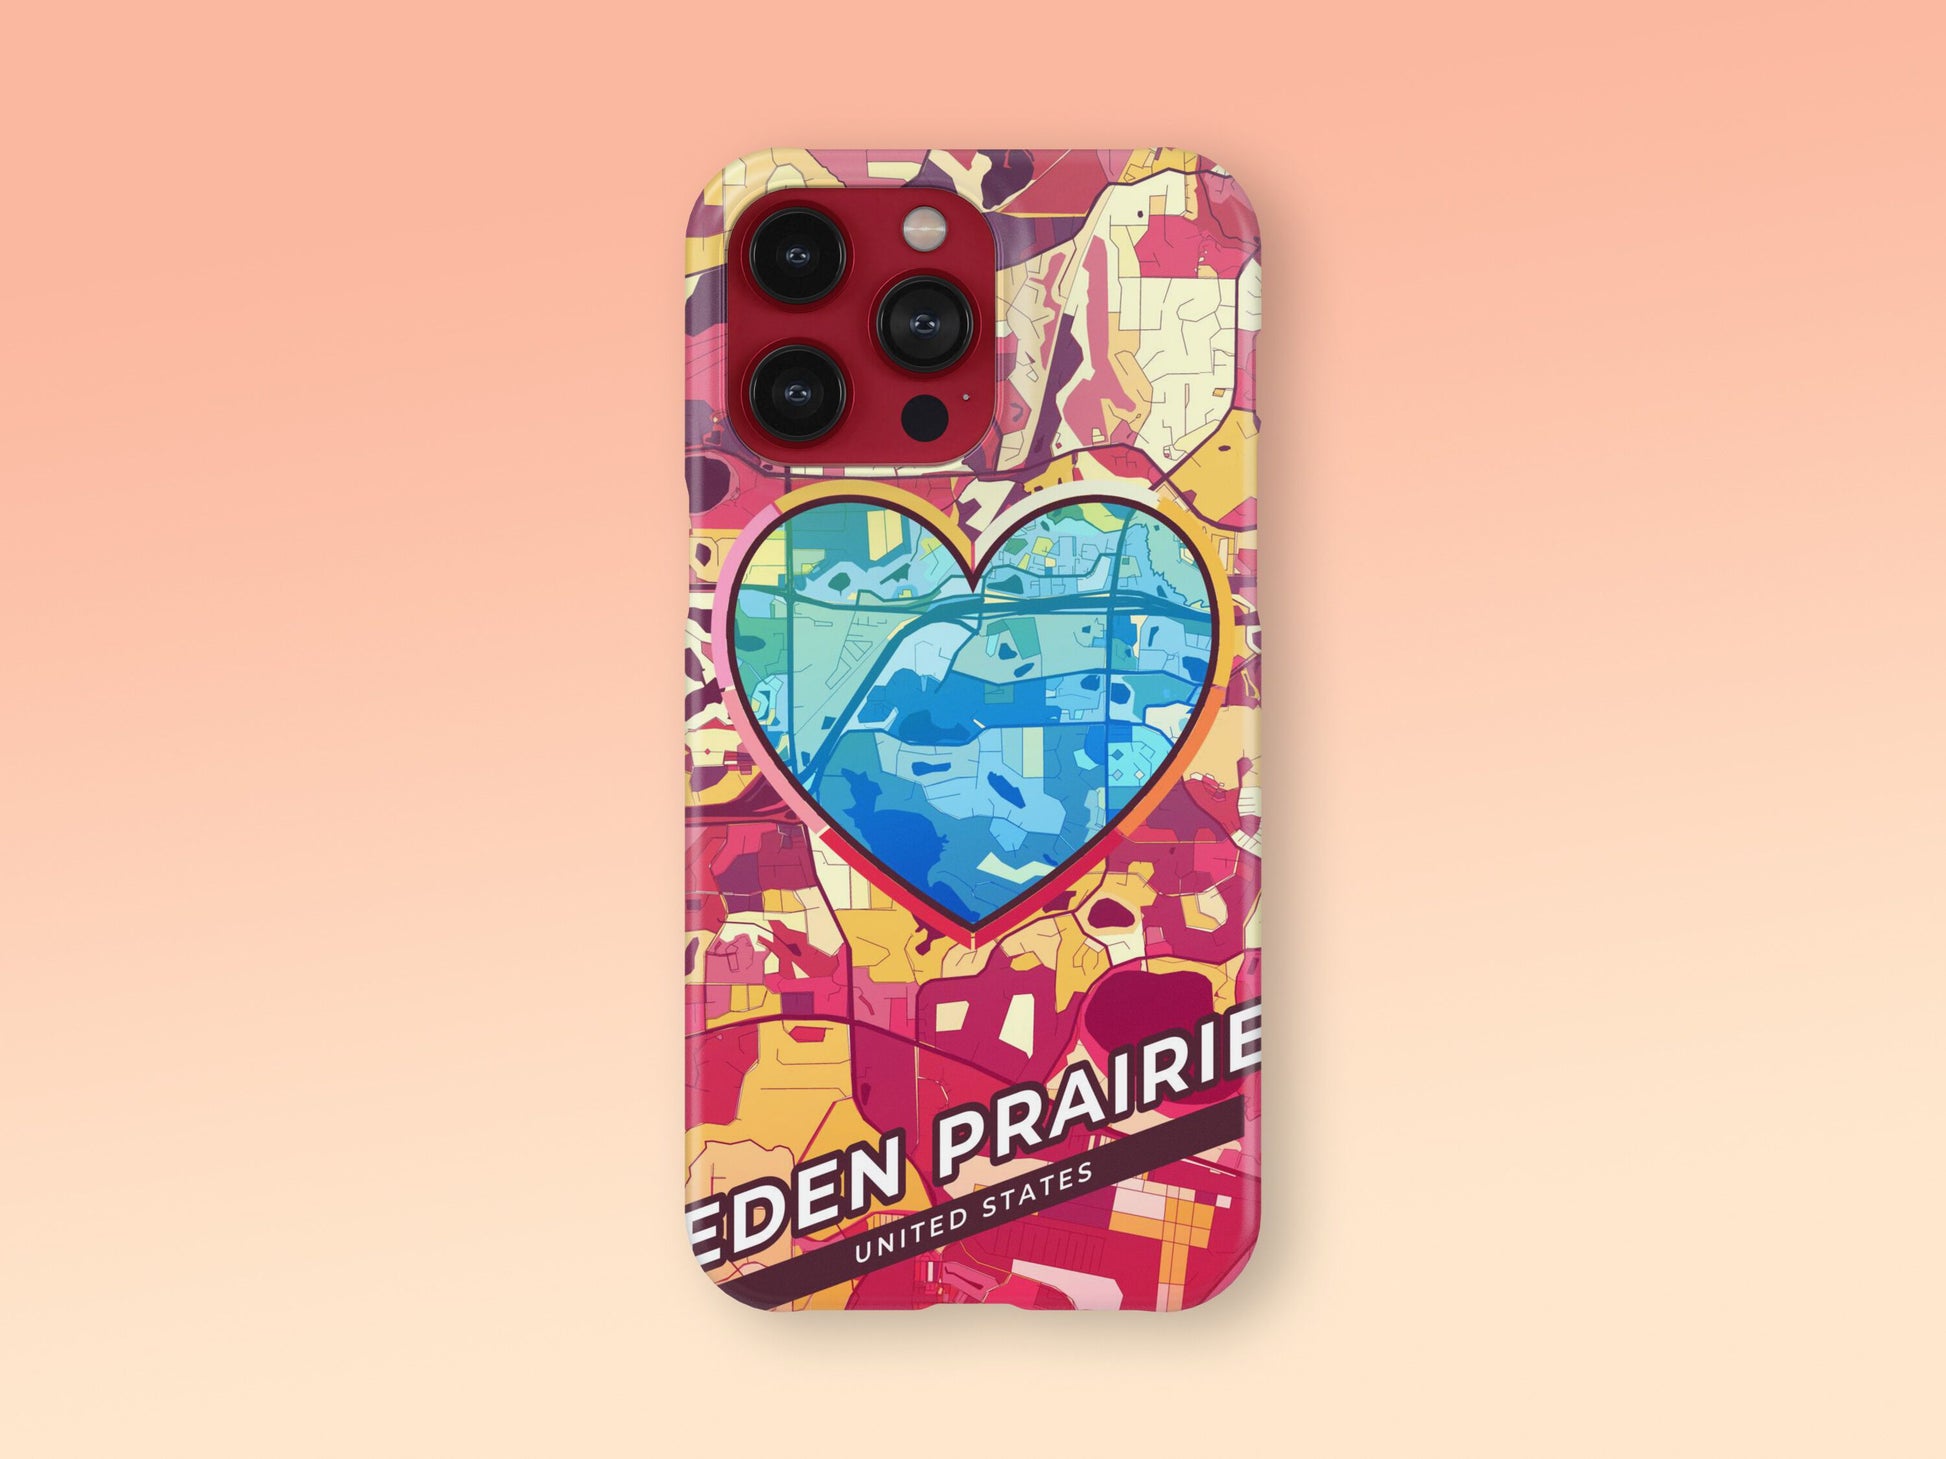 Eden Prairie Minnesota slim phone case with colorful icon. Birthday, wedding or housewarming gift. Couple match cases. 2